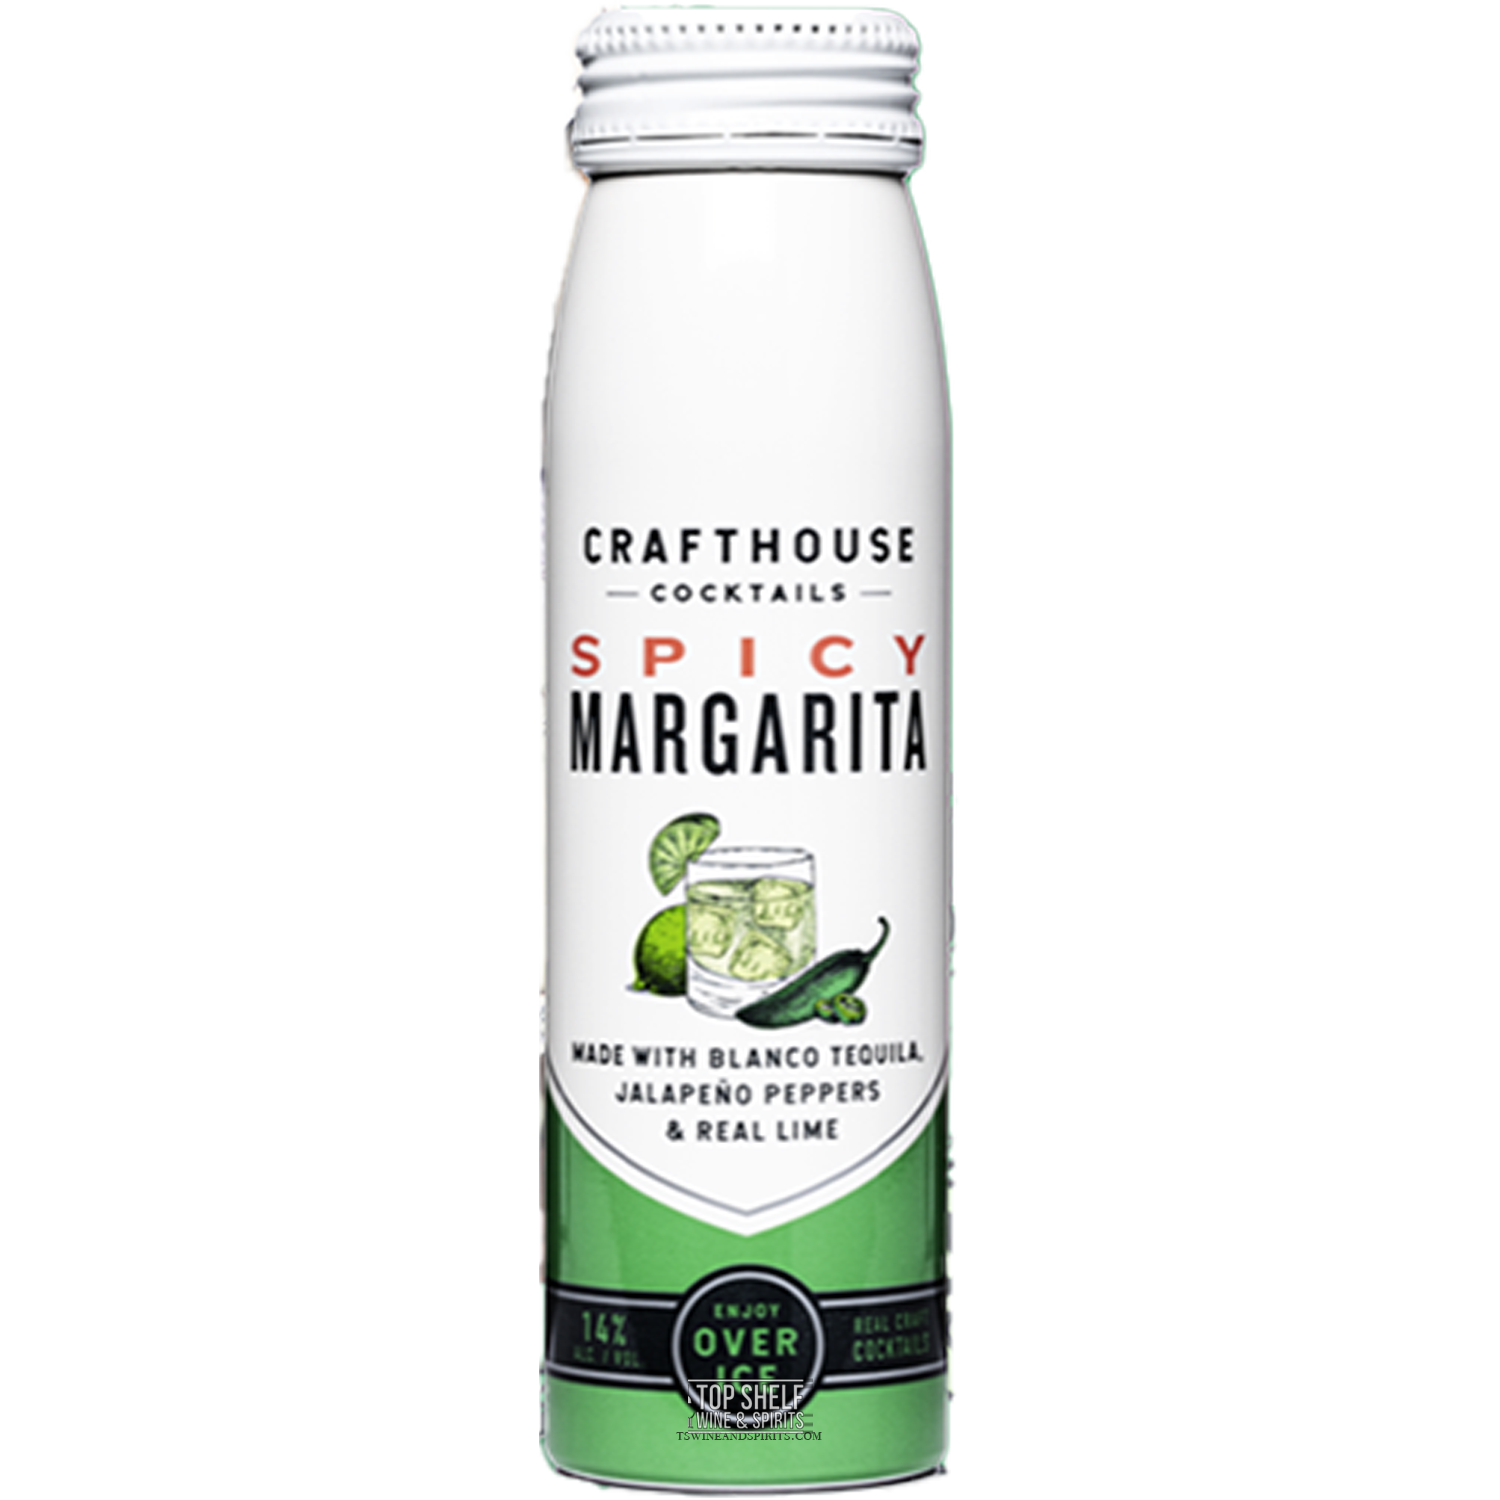 Crafthouse Cocktails Spicy Margarita 200ml